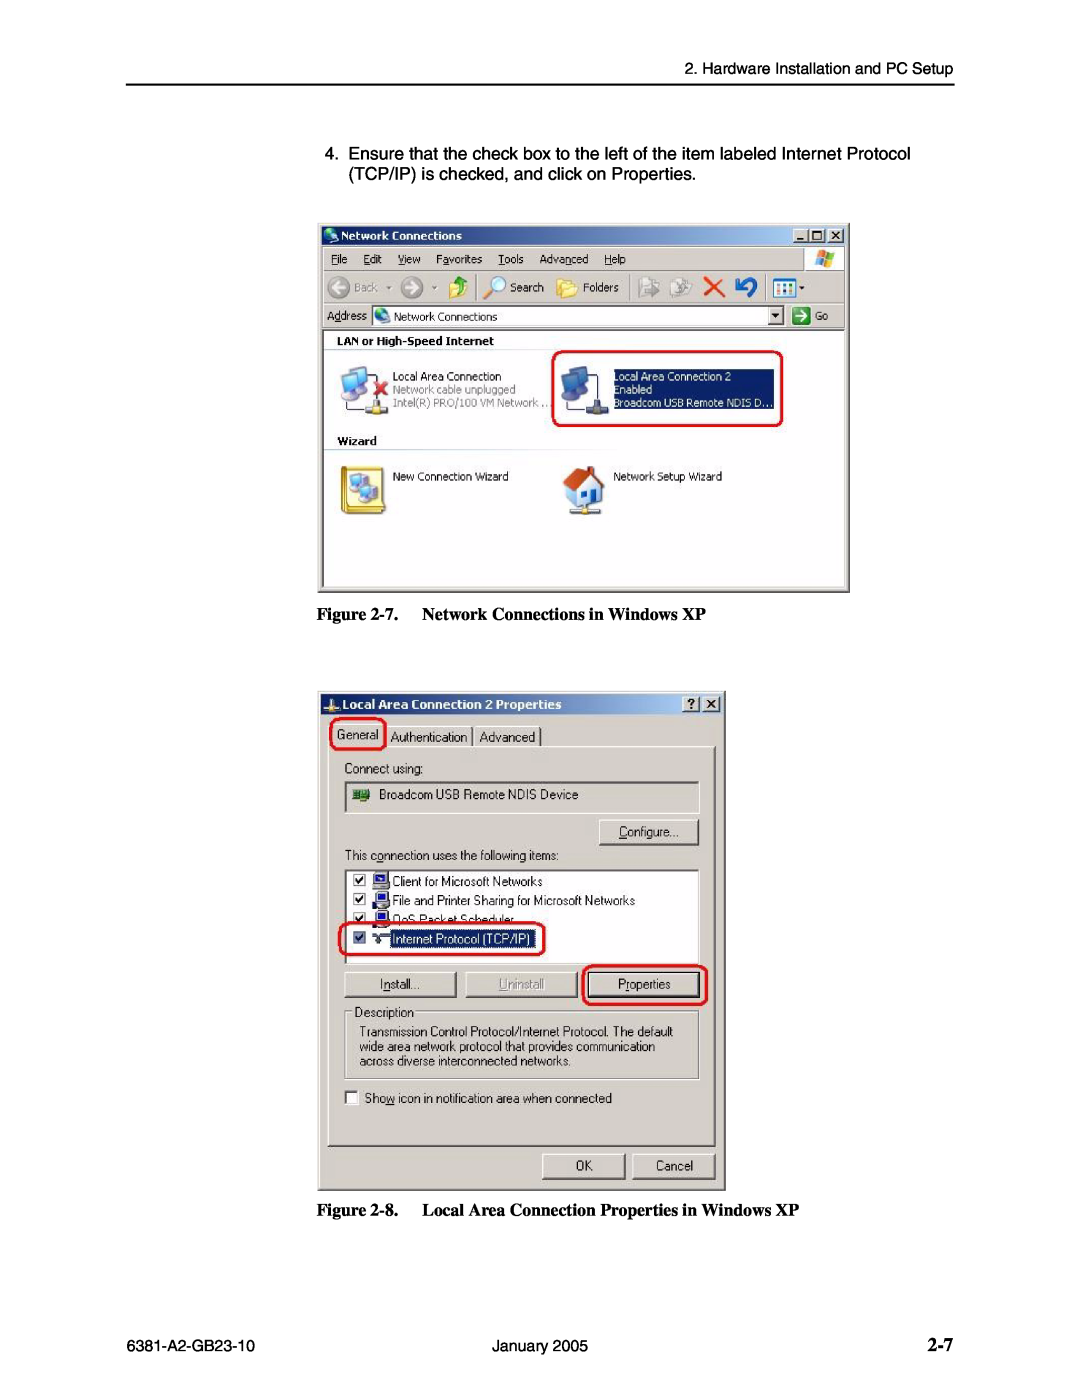 Paradyne 6381-A3 manual 7. Network Connections in Windows XP, 8. Local Area Connection Properties in Windows XP 